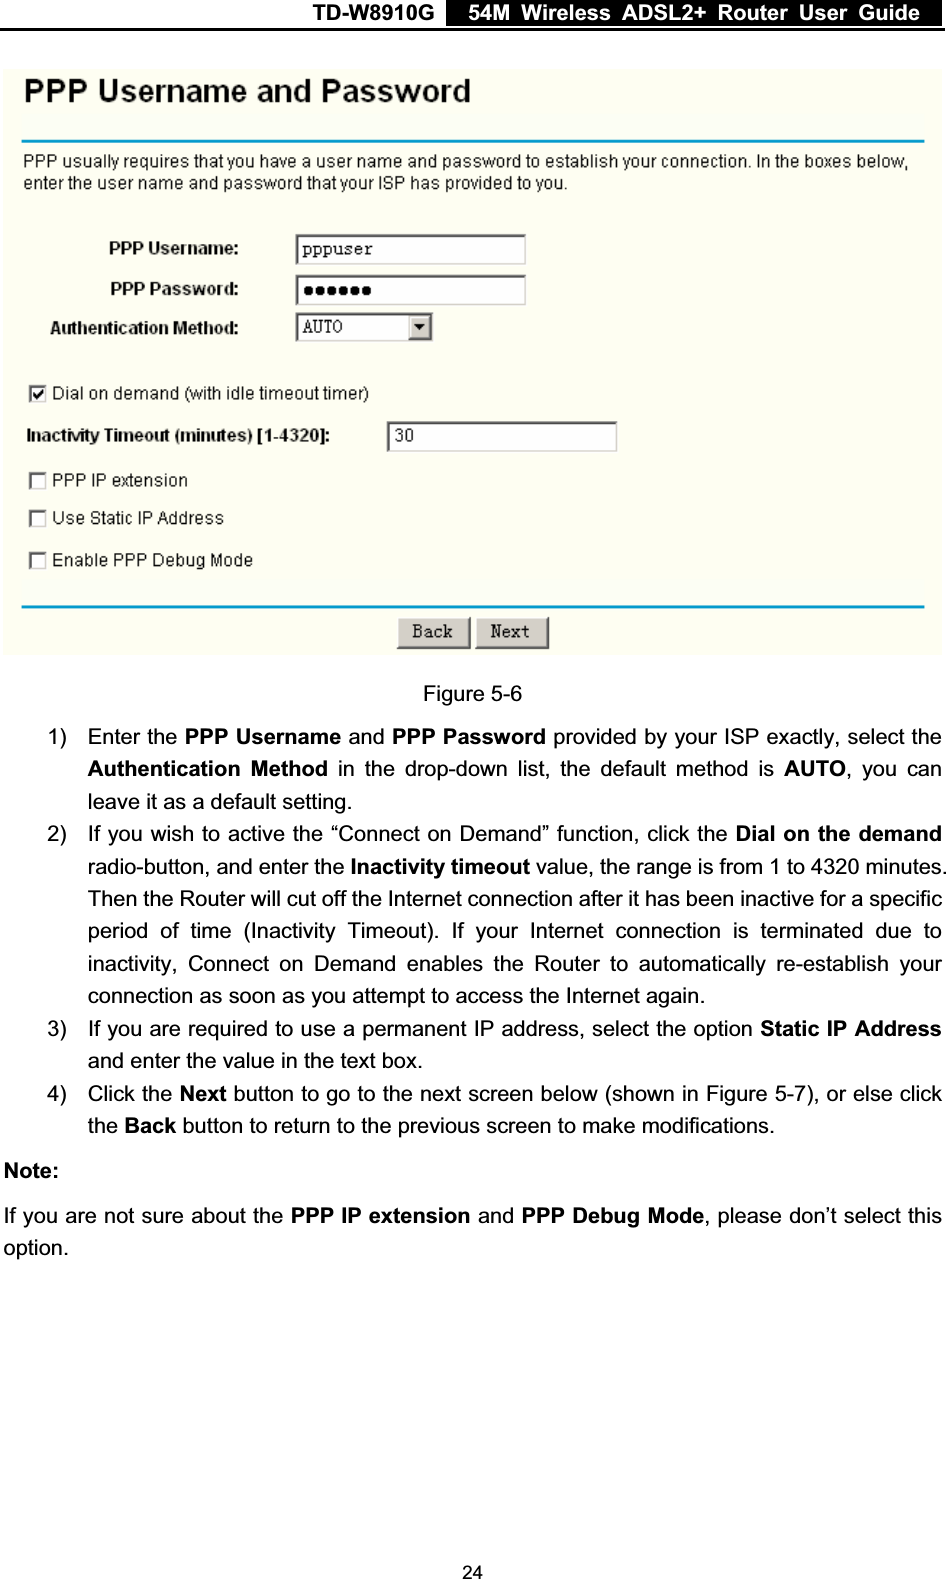 TD-W8910G    54M Wireless ADSL2+ Router User Guide  Figure 5-6 1) Enter the PPP Username and PPP Password provided by your ISP exactly, select the Authentication Method in the drop-down list, the default method is AUTO, you can leave it as a default setting. 2)  If you wish to active the “Connect on Demand” function, click the Dial on the demandradio-button, and enter the Inactivity timeout value, the range is from 1 to 4320 minutes. Then the Router will cut off the Internet connection after it has been inactive for a specific period of time (Inactivity Timeout). If your Internet connection is terminated due to inactivity, Connect on Demand enables the Router to automatically re-establish your connection as soon as you attempt to access the Internet again. 3)  If you are required to use a permanent IP address, select the option Static IP Addressand enter the value in the text box. 4) Click the Next button to go to the next screen below (shown in Figure 5-7), or else click the Back button to return to the previous screen to make modifications. Note:If you are not sure about the PPP IP extension and PPP Debug Mode, please don’t select this option. 24